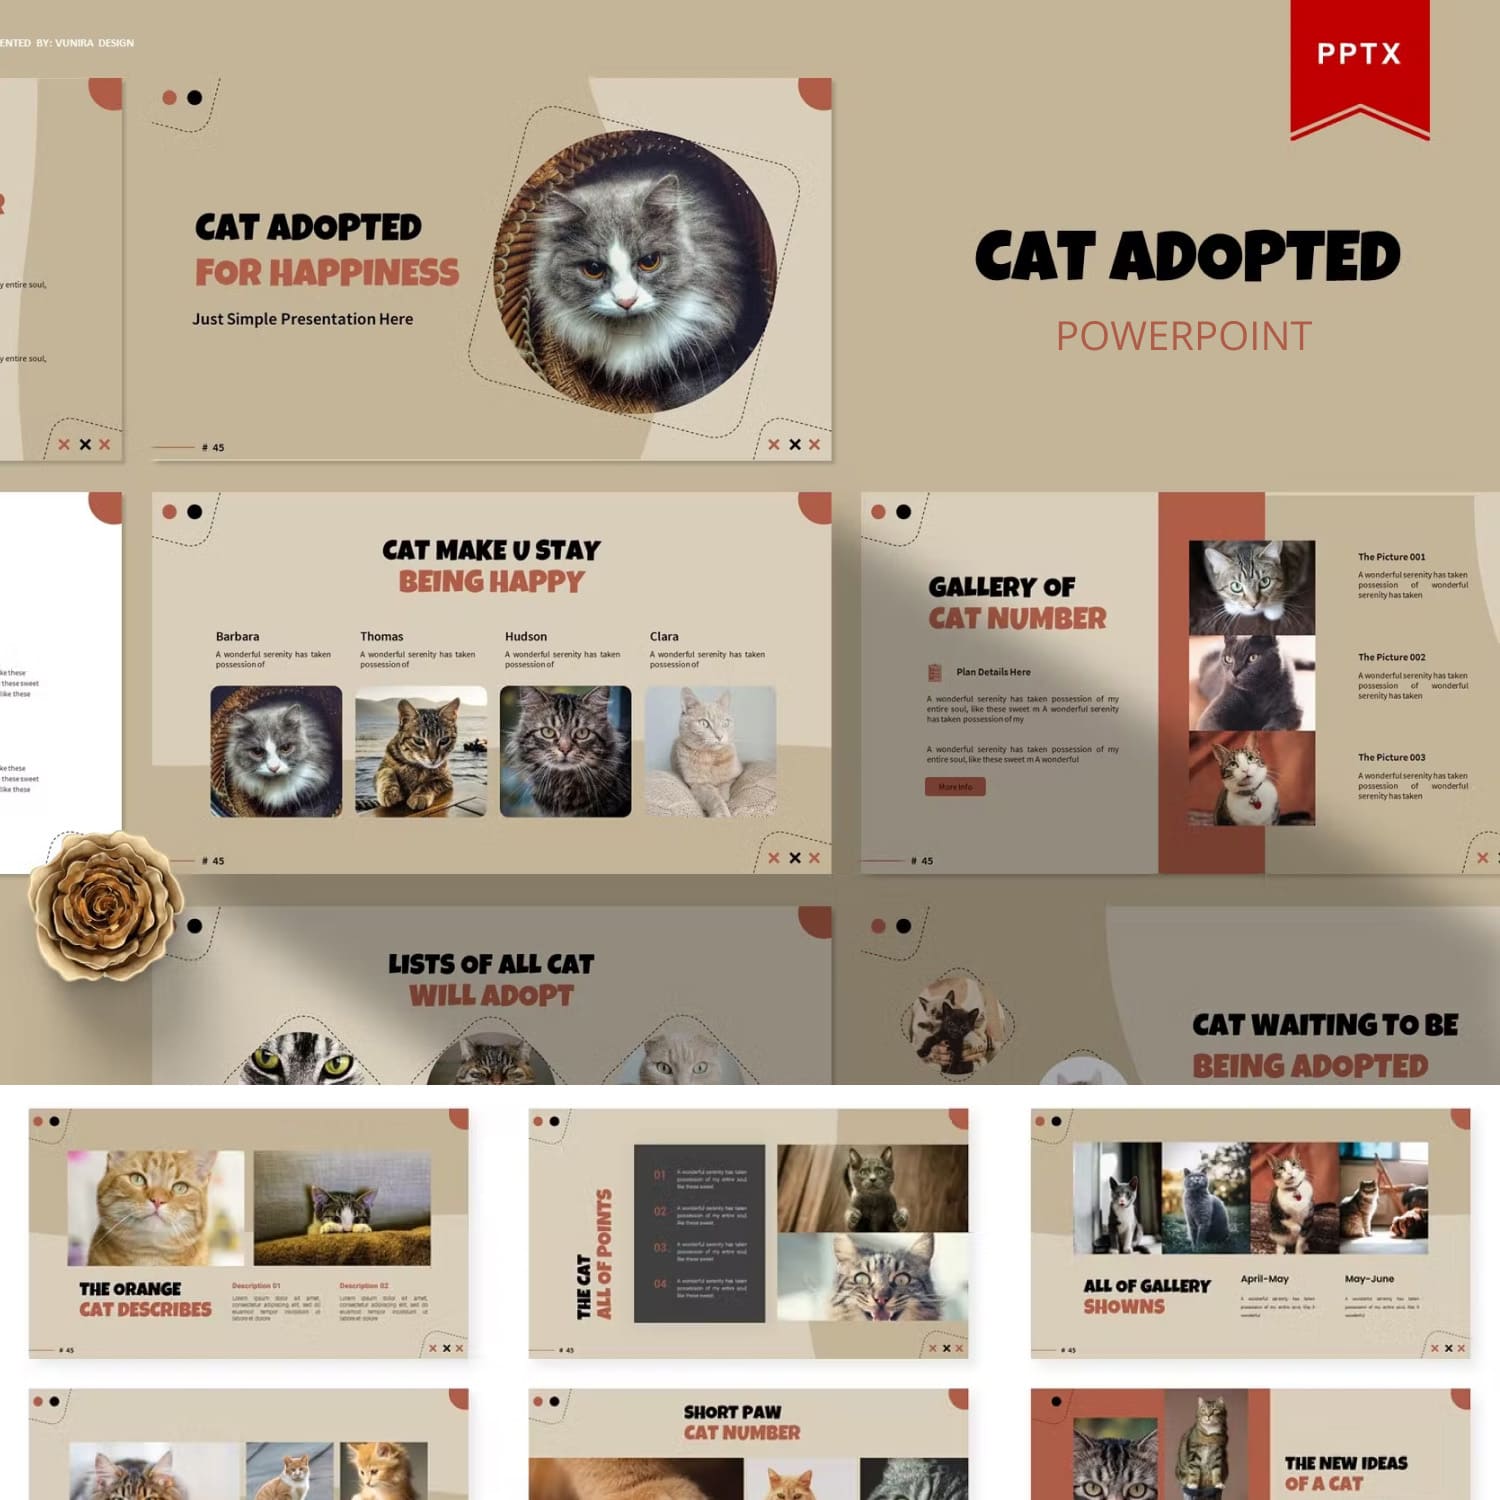 Cat adopted for happines powerpoint template - main image preview.